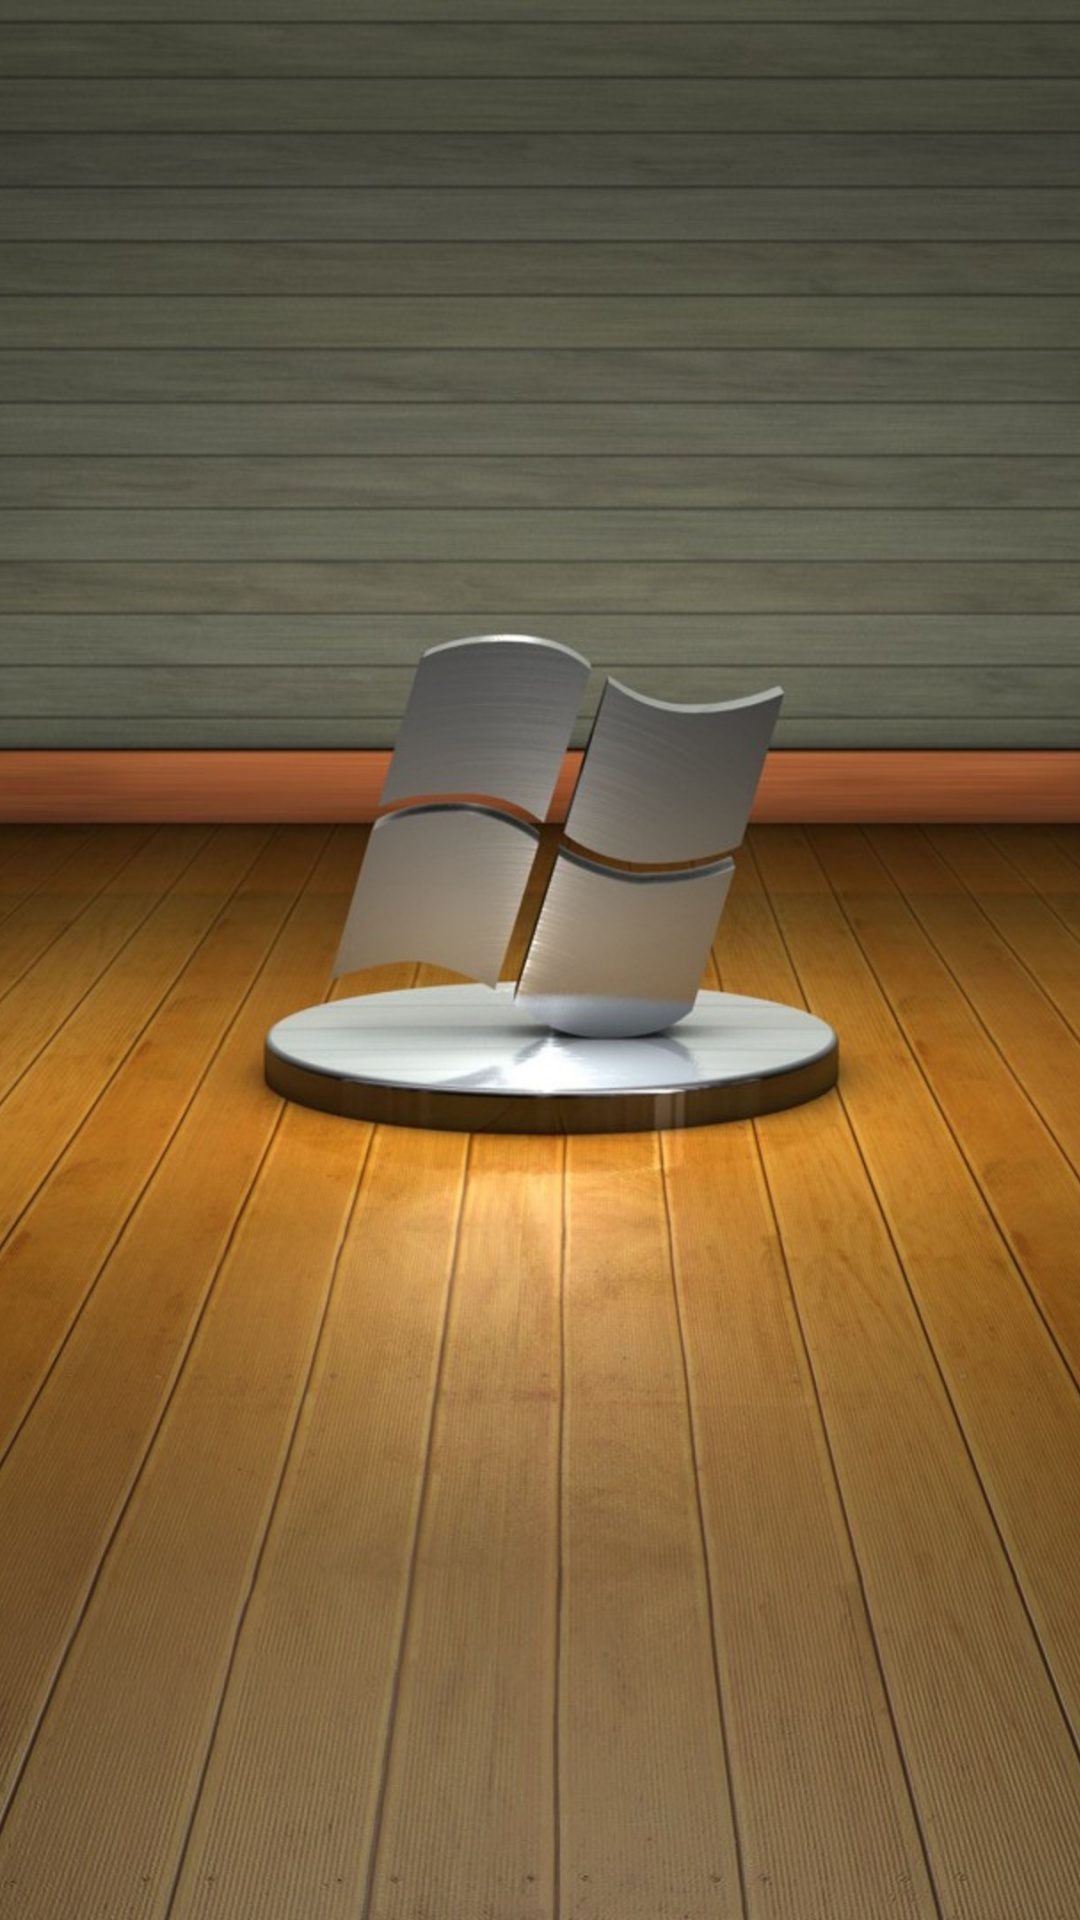 White Chair on Brown Wooden Floor. Wallpaper in 1080x1920 Resolution